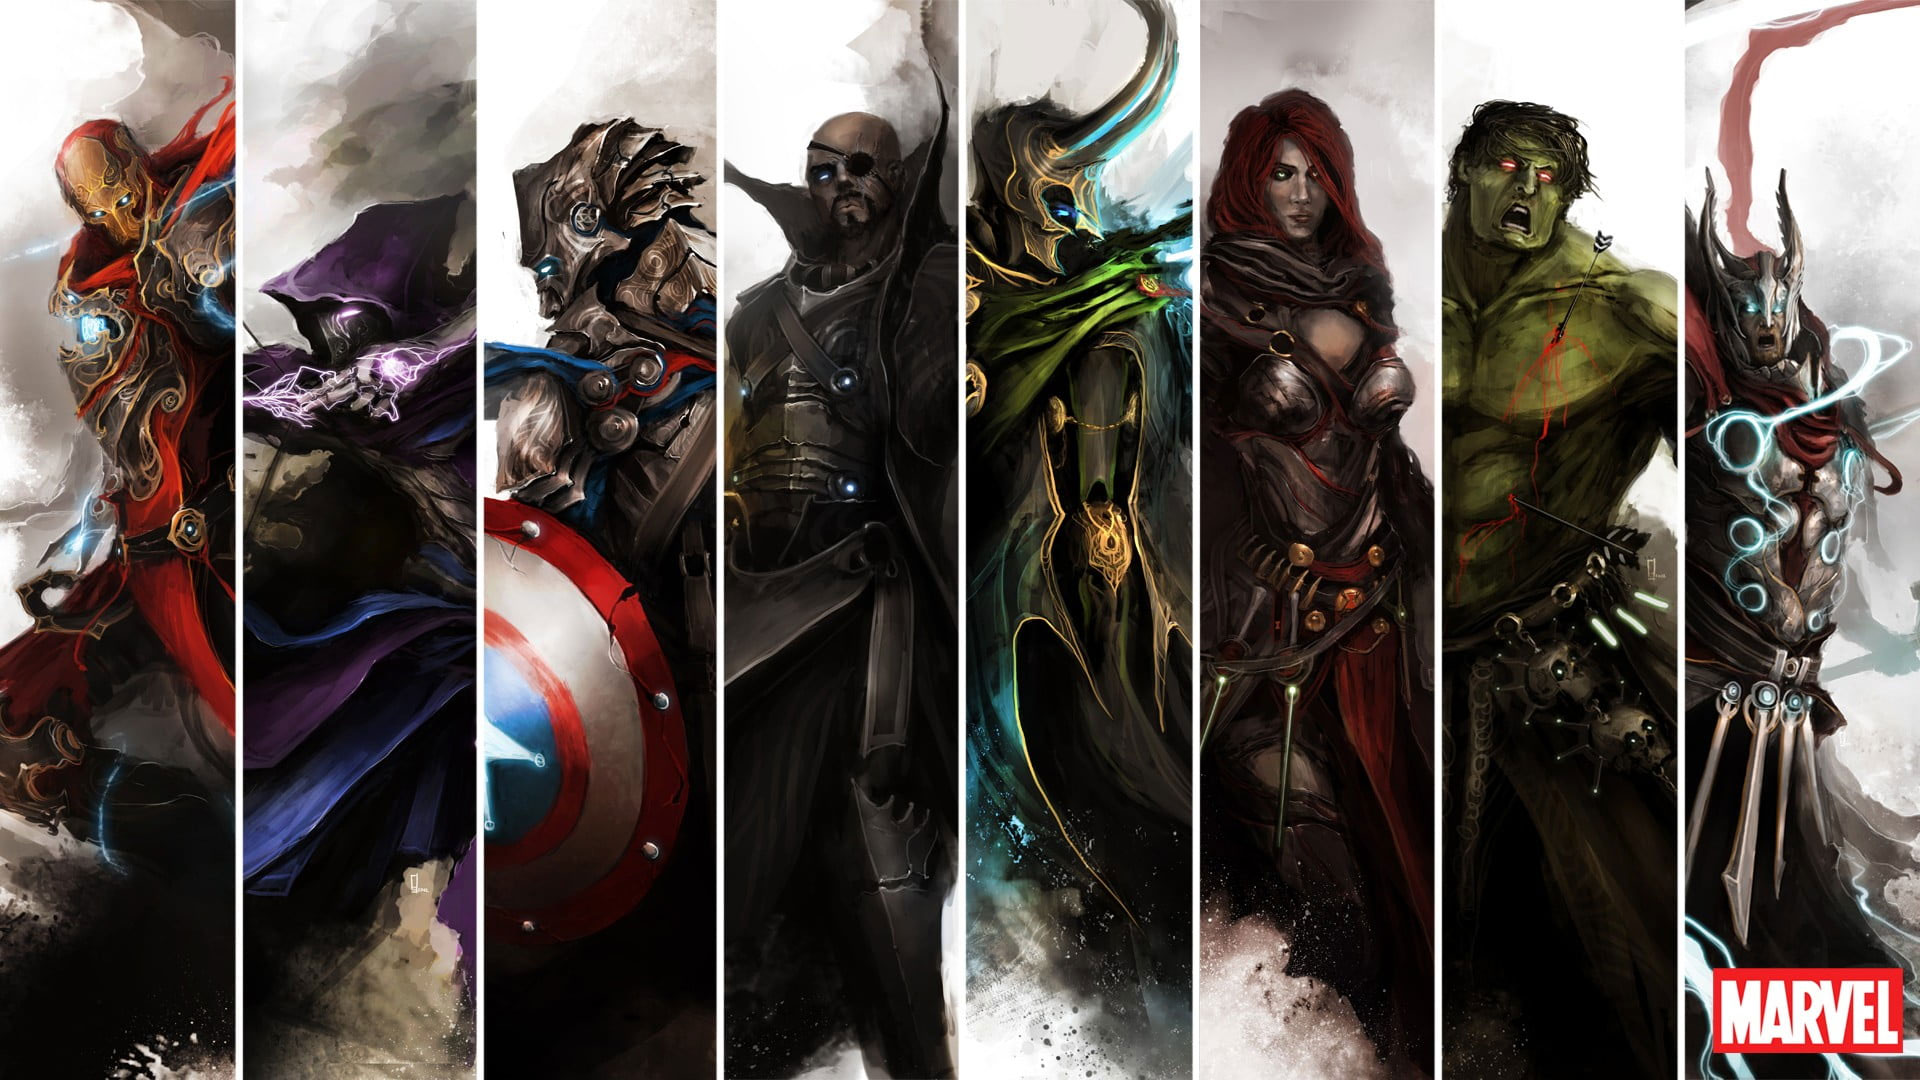 Marvel Characters Collage Wallpaper, Marvel